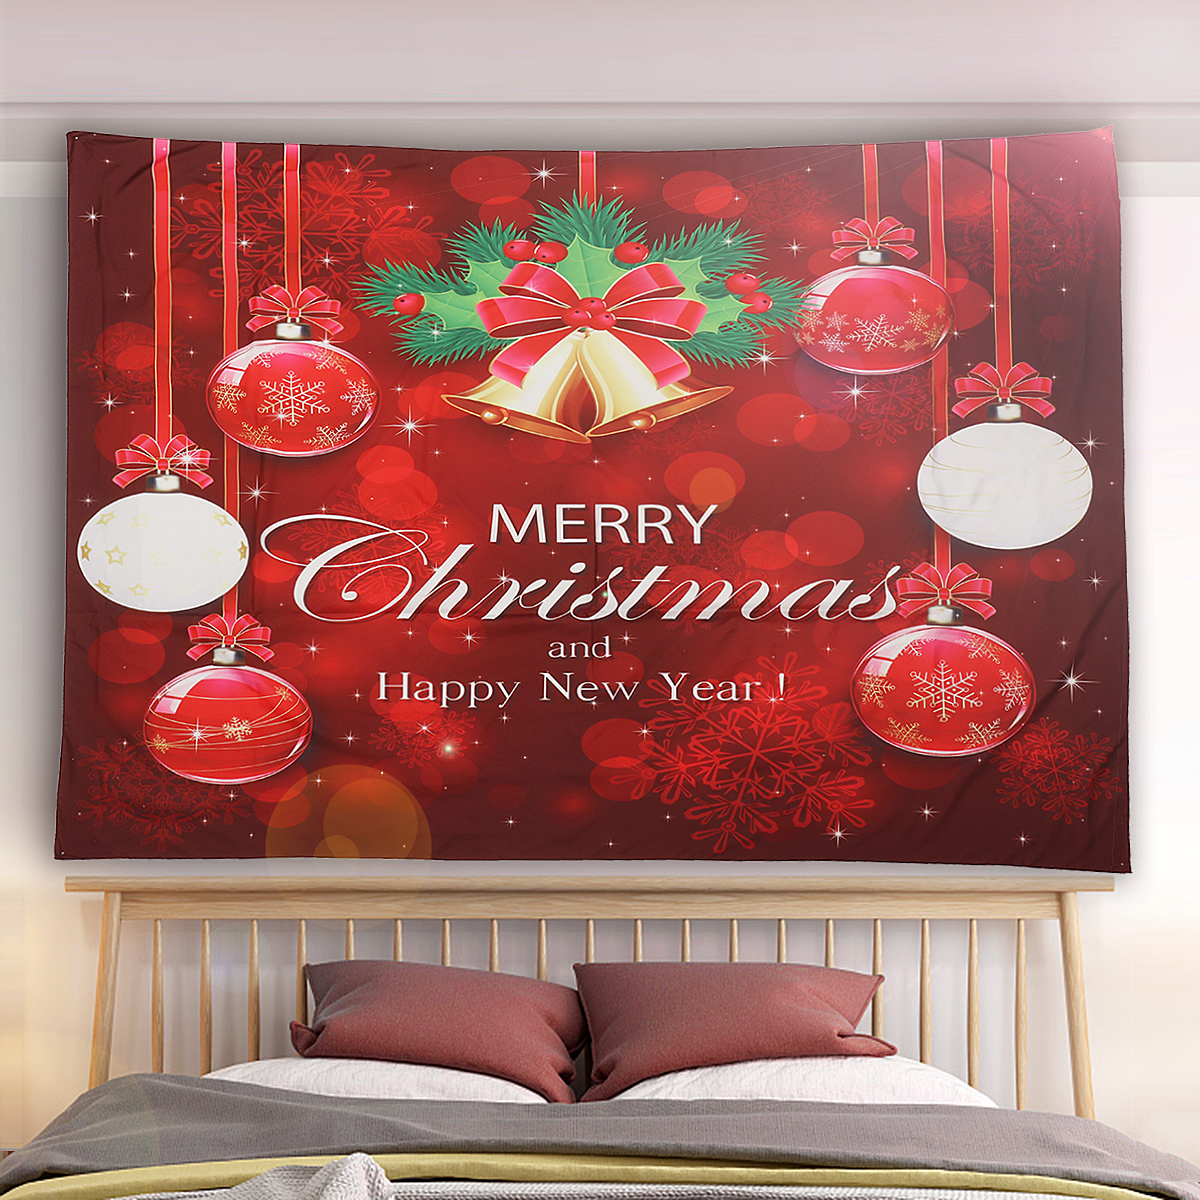 Xmas-Home-Wall-Hanging-Tapestry-Bell-Printed-Wall-Ornaments-Red-Christmas-Wall-Decor-Tapestry-1411512-4